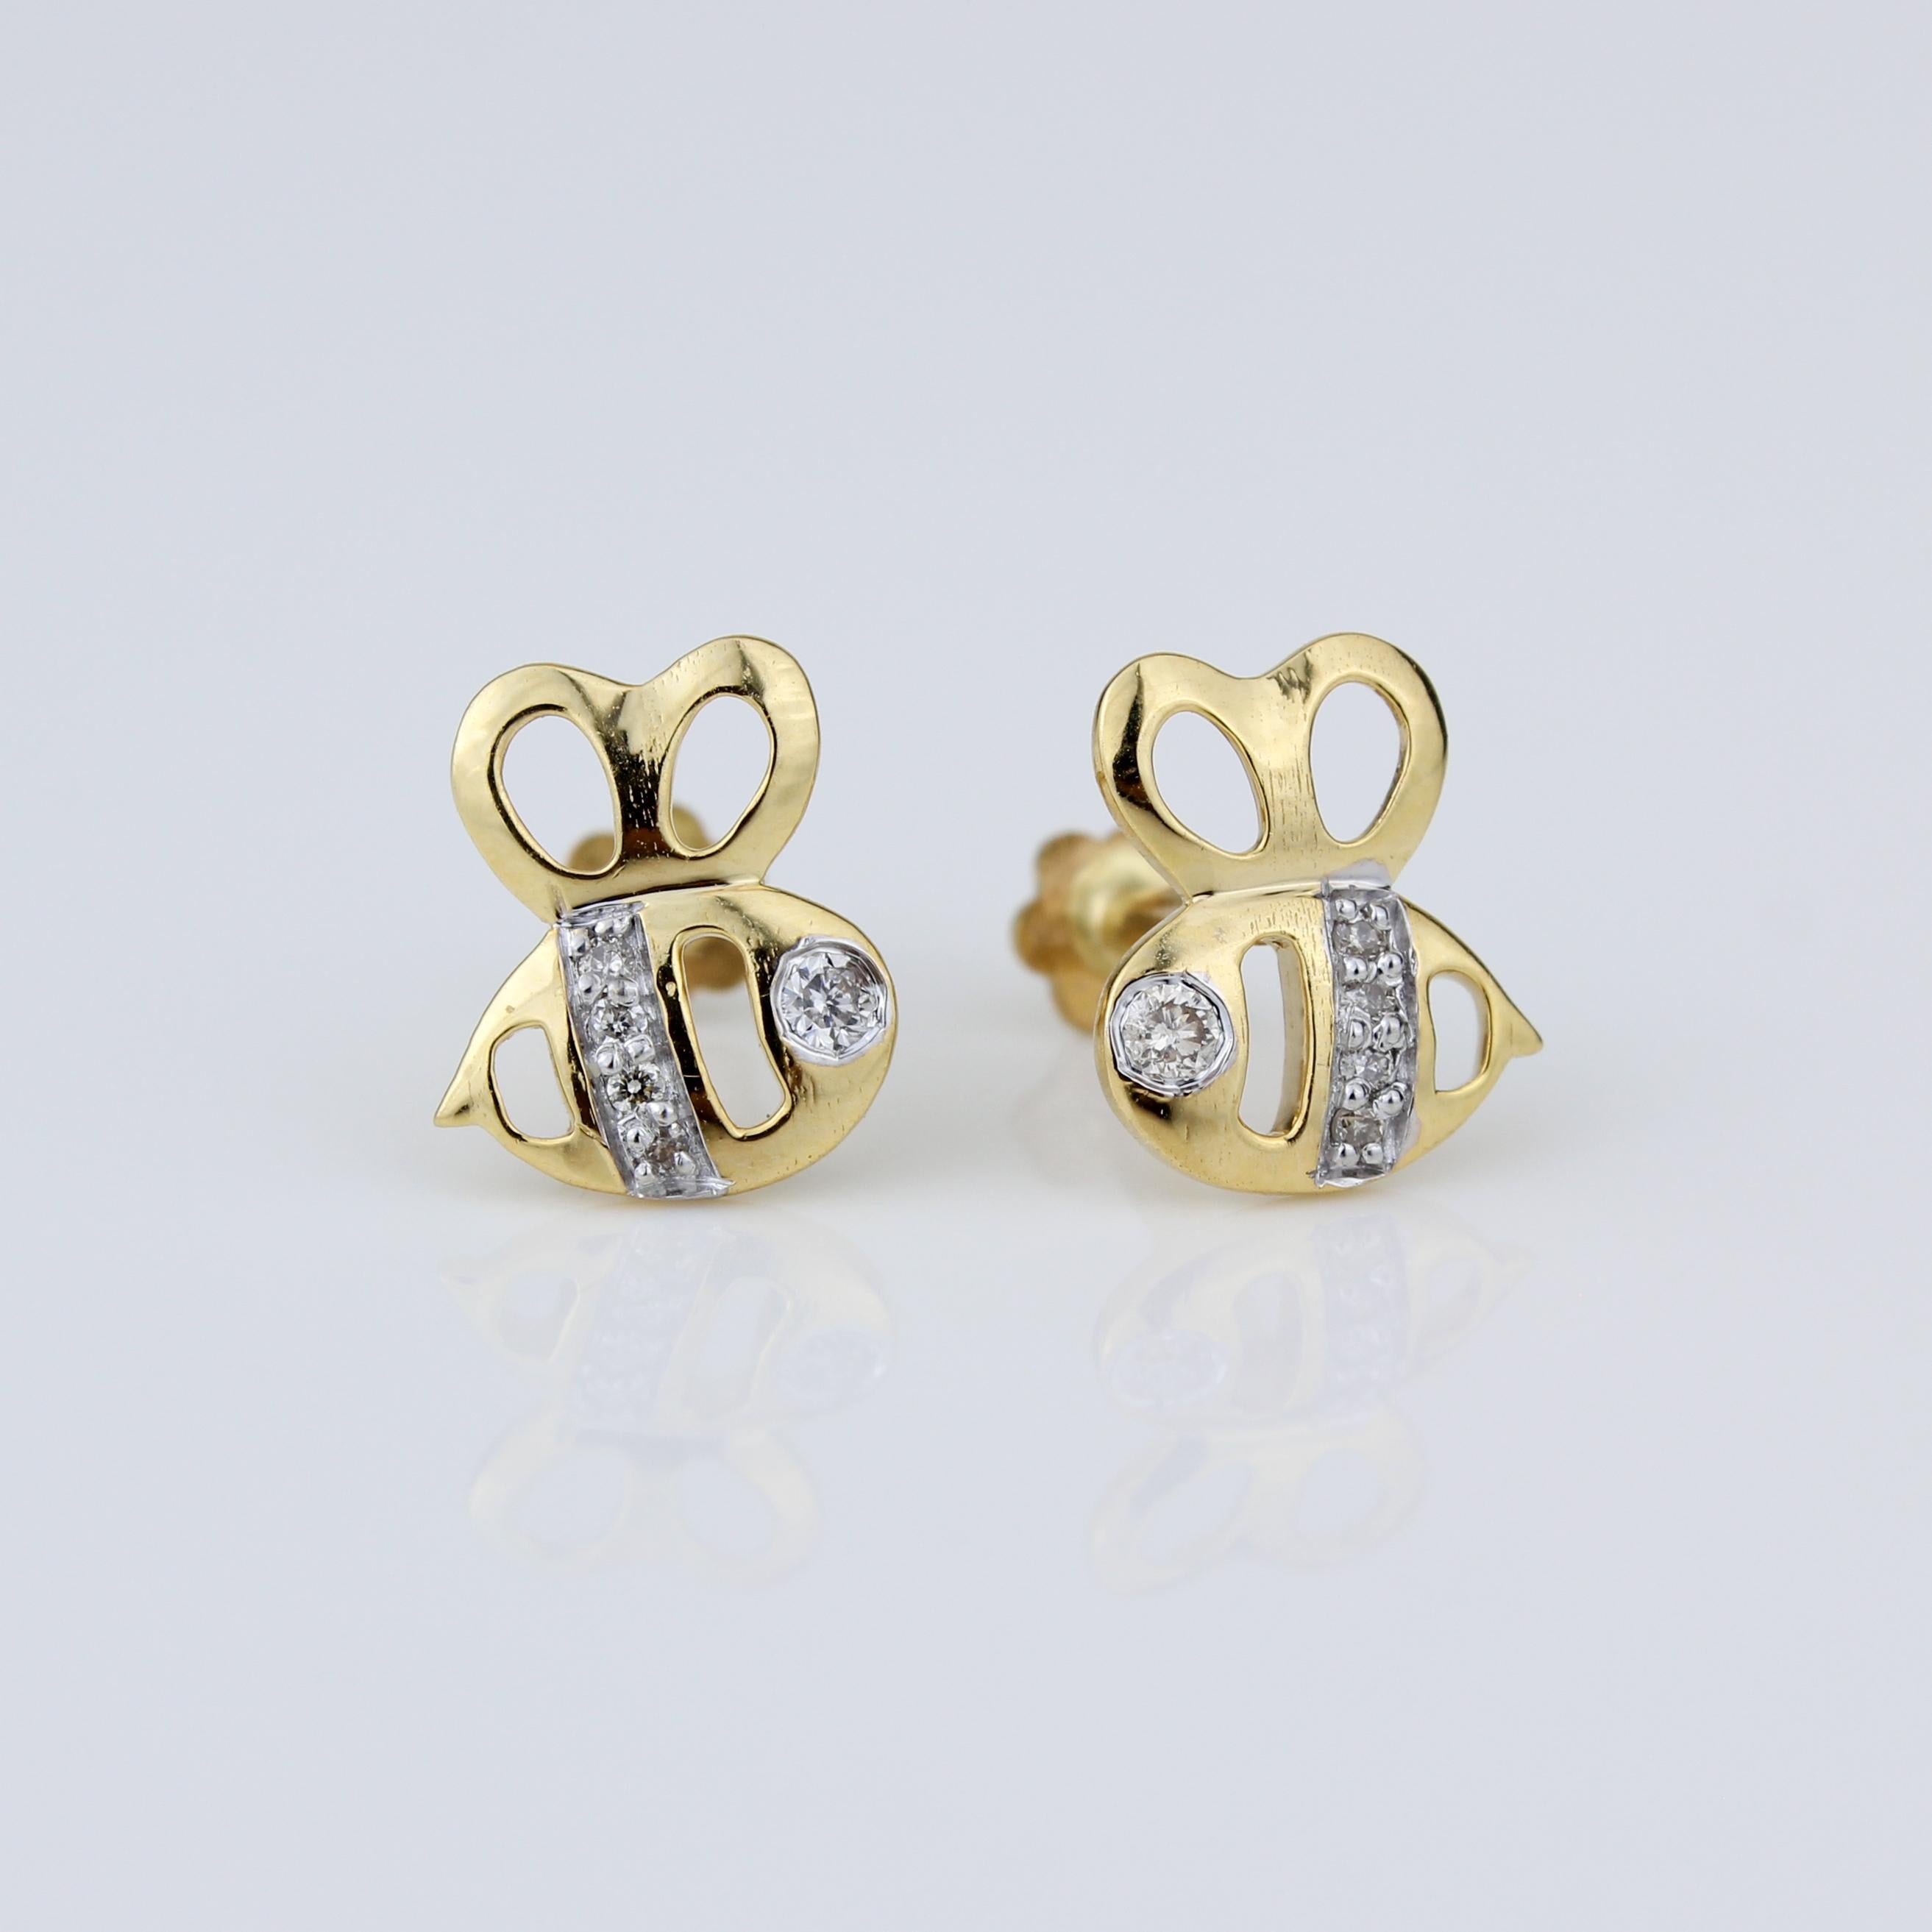 Round Cut Honeybee Diamond Earrings for Girls/Toddlers/Kids in 18K Solid Gold For Sale